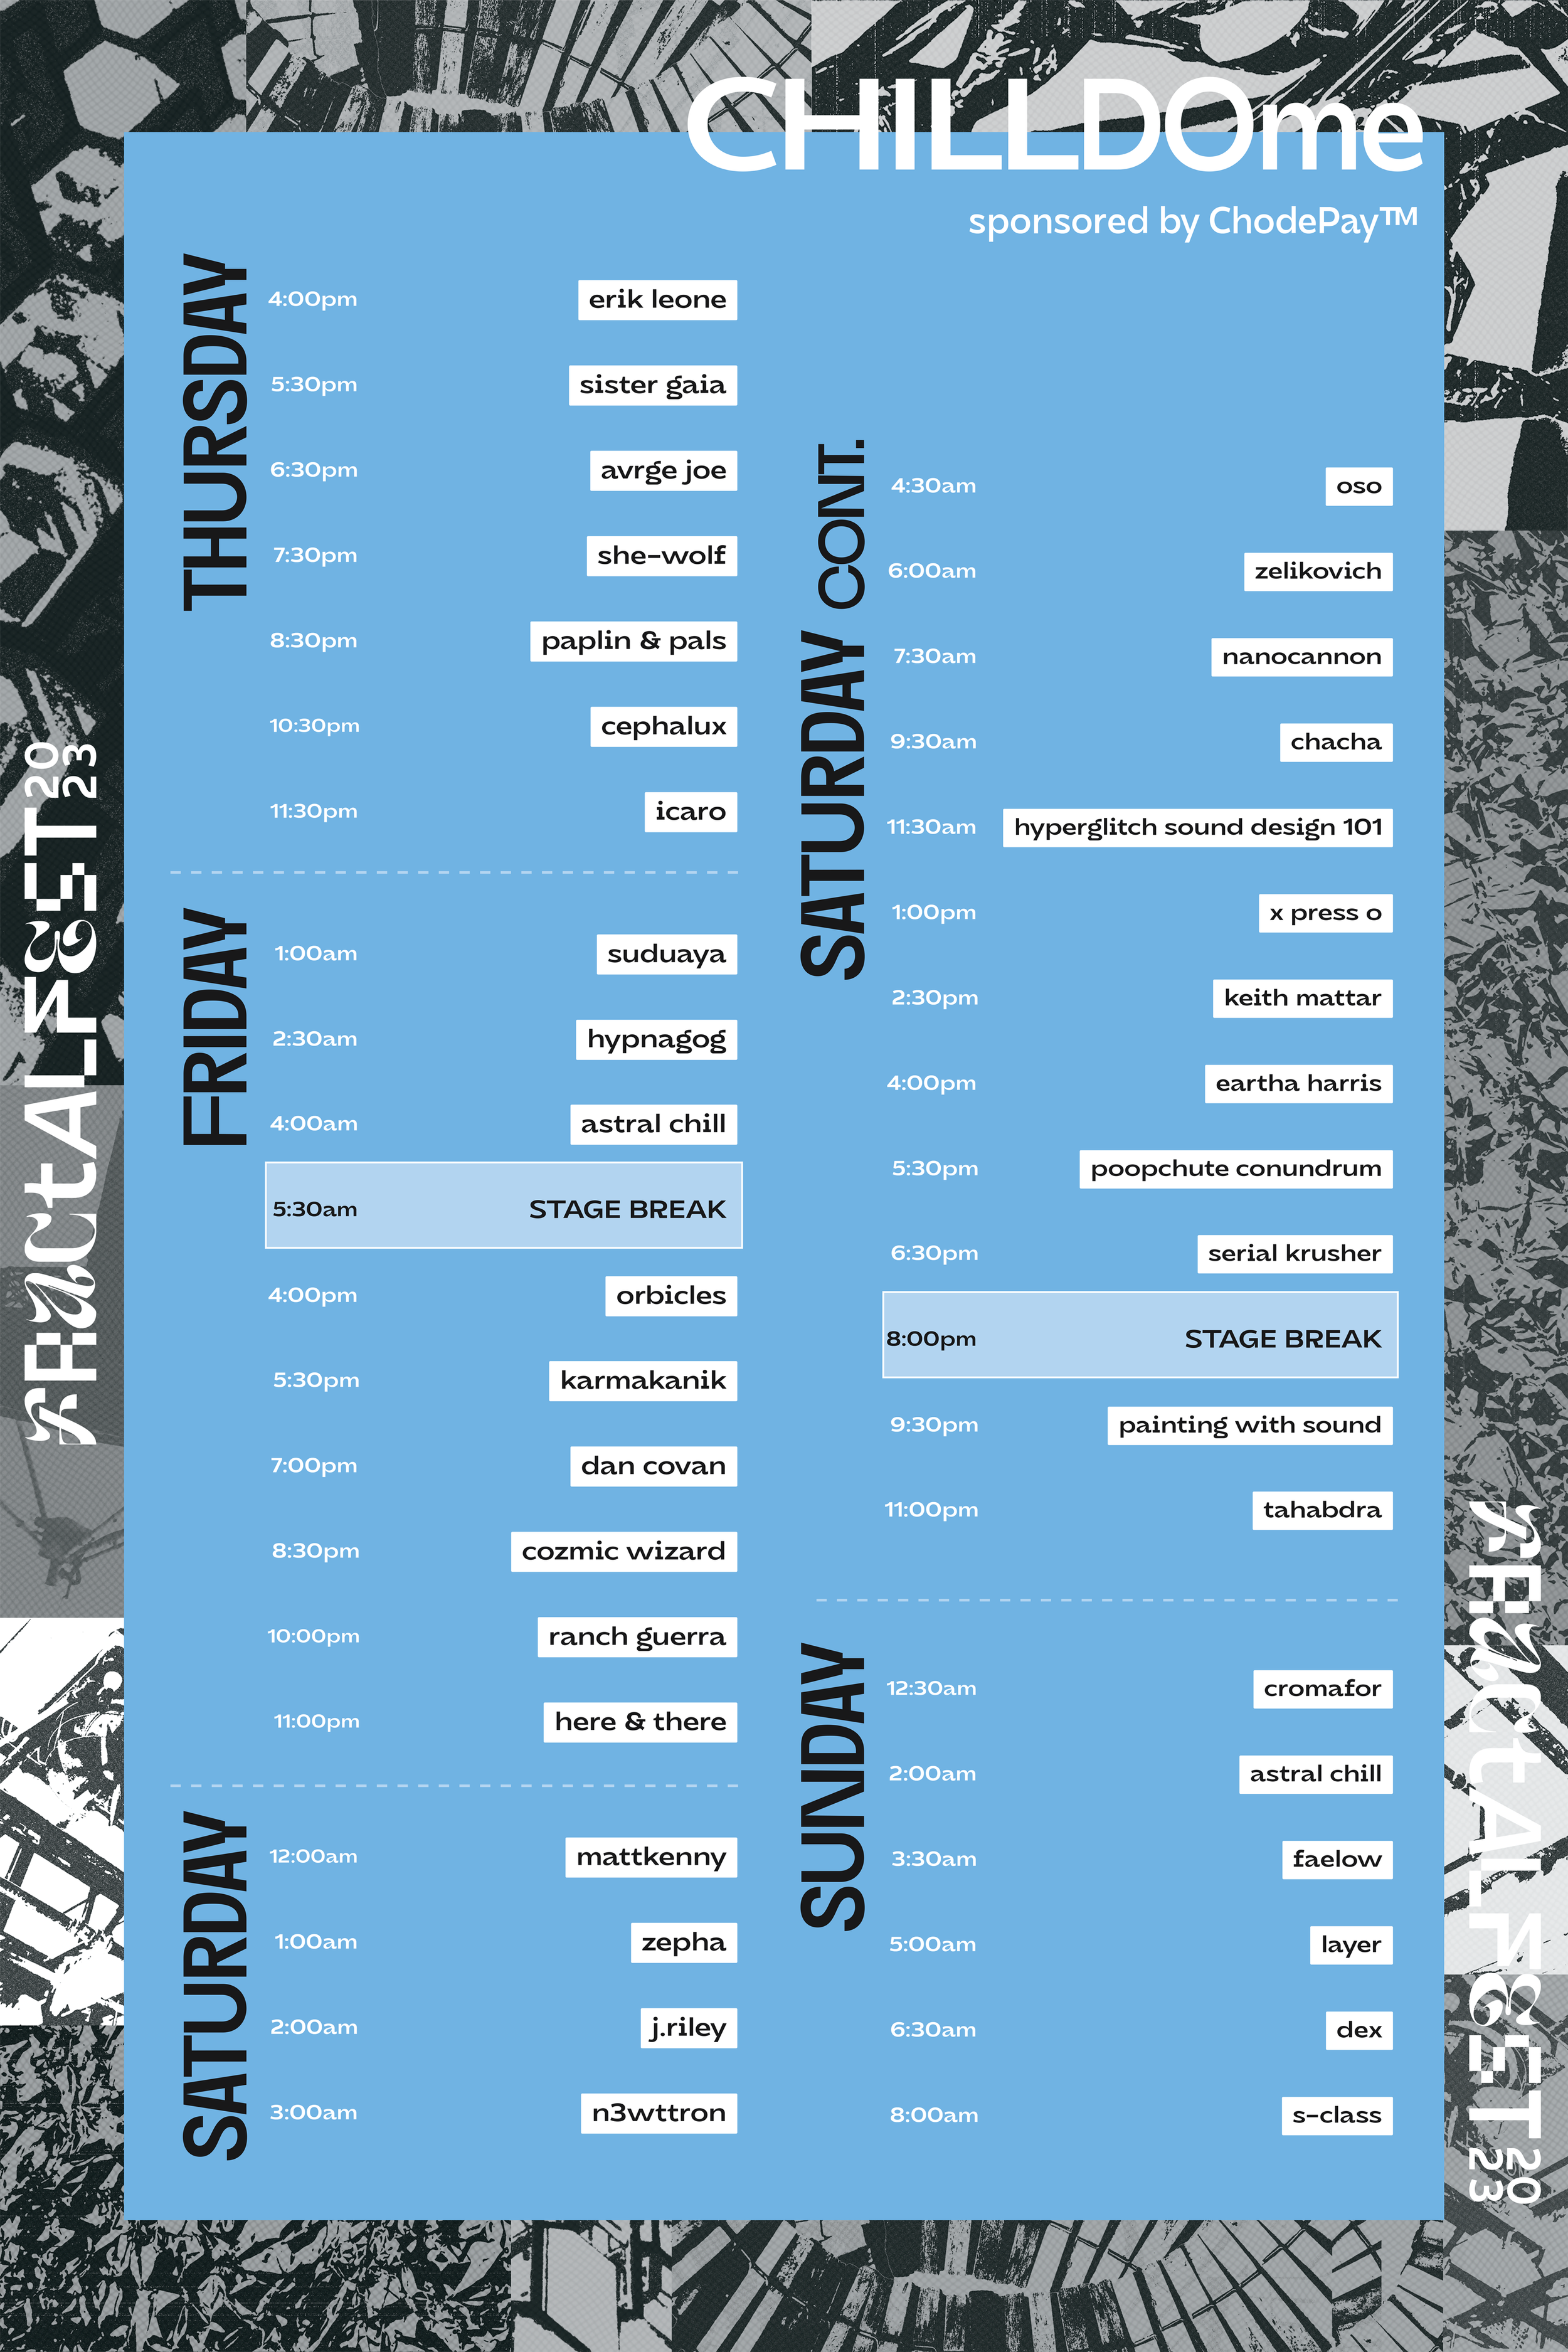 FF23-Stages_Schedules-CHILLDOme-WEB.png